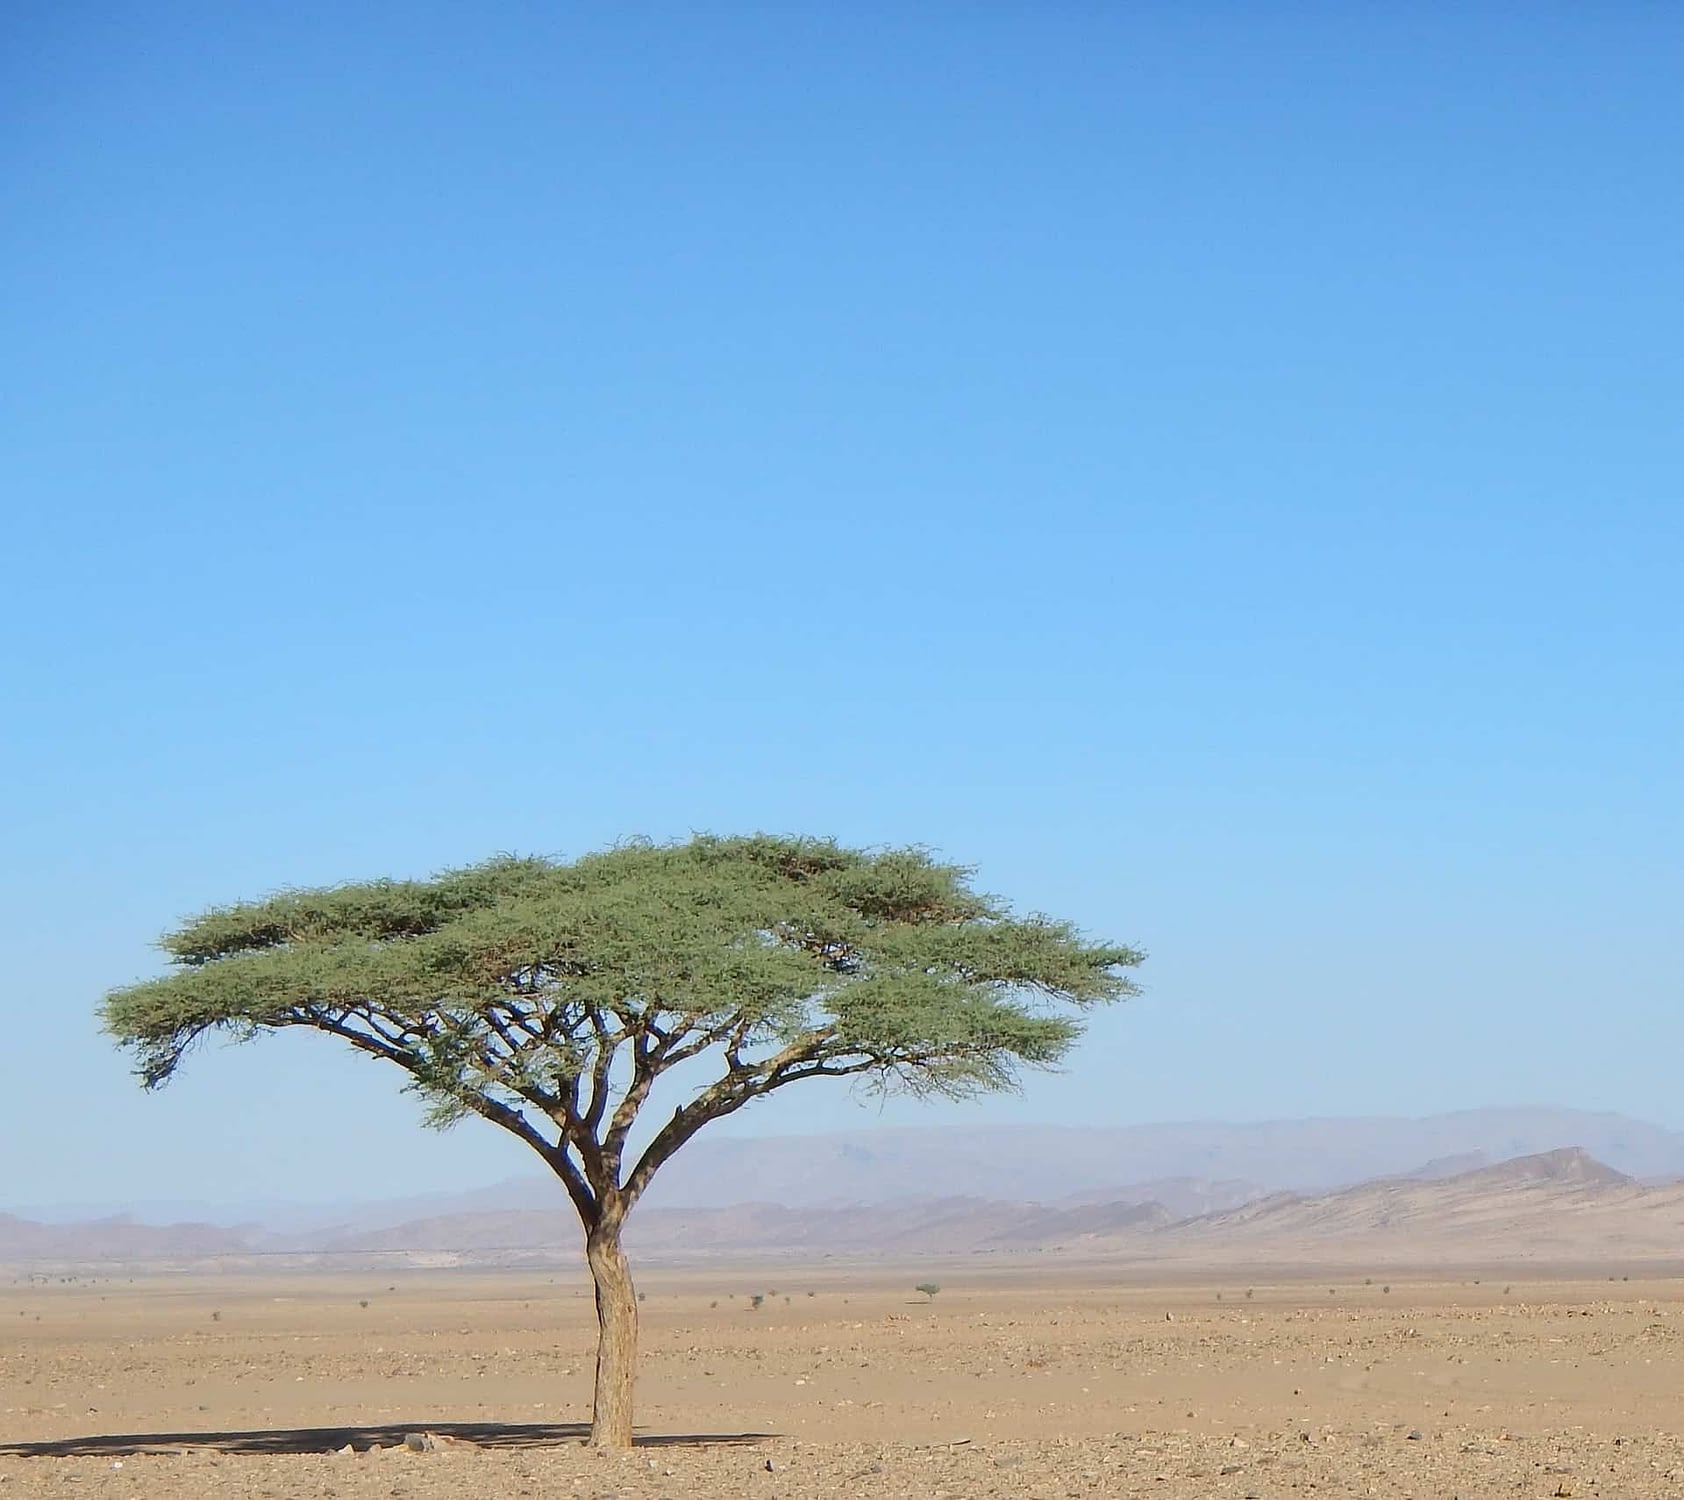 A green tree stands tall in the Sahara Desert